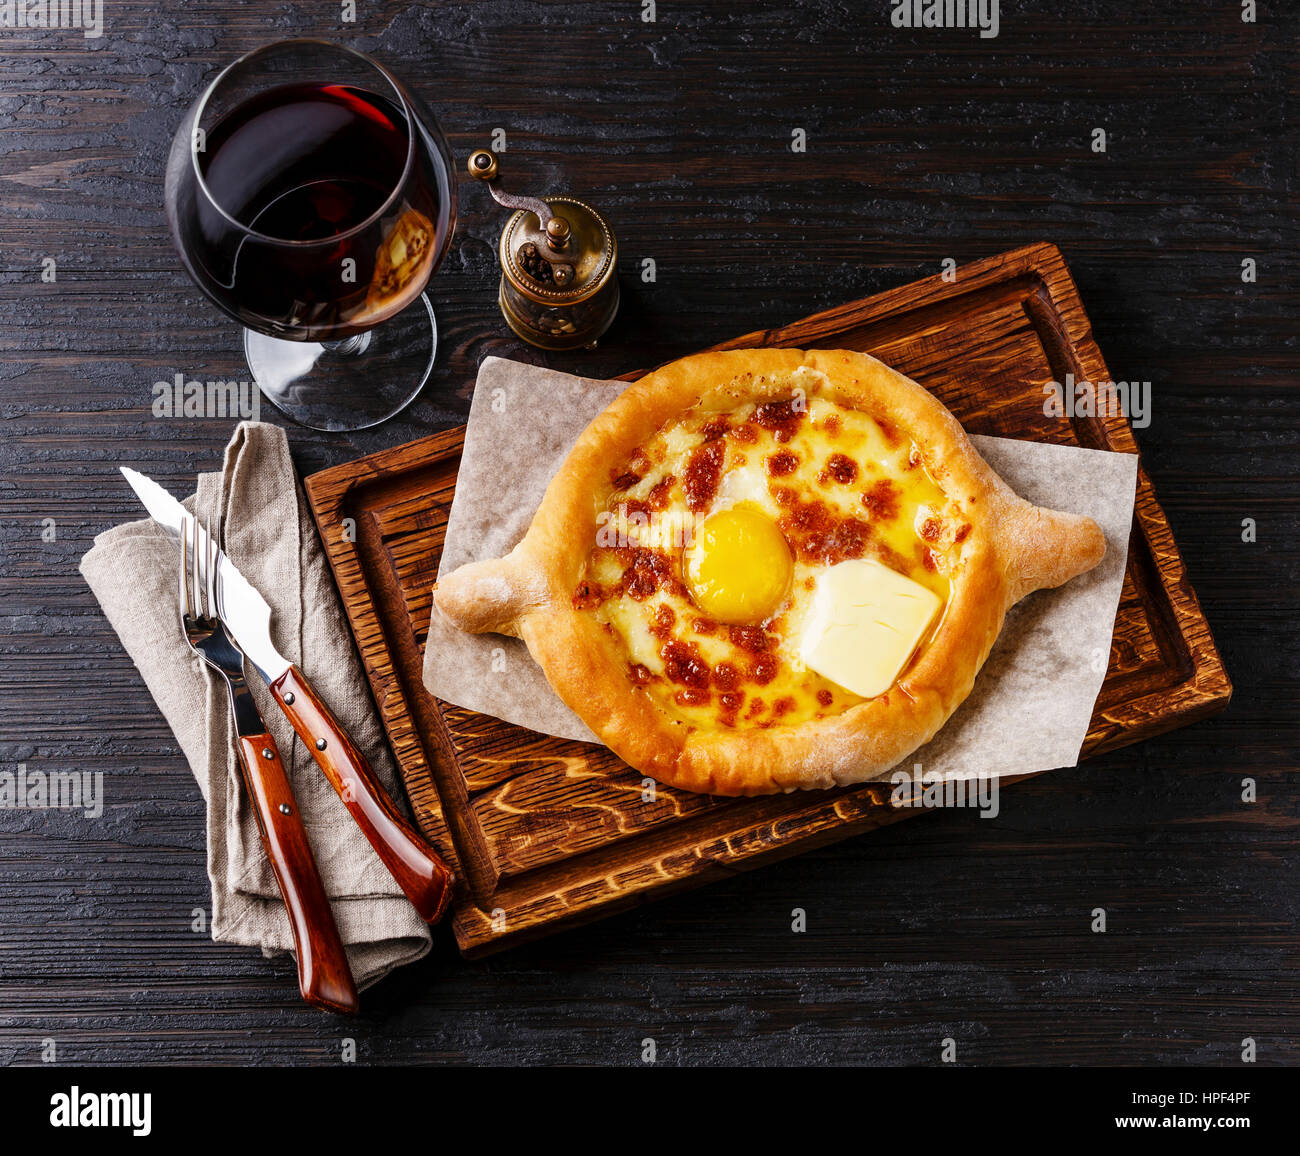 Ajarian Khachapuri traditional Georgian cheese pastry and wine on burned black wooden background Stock Photo